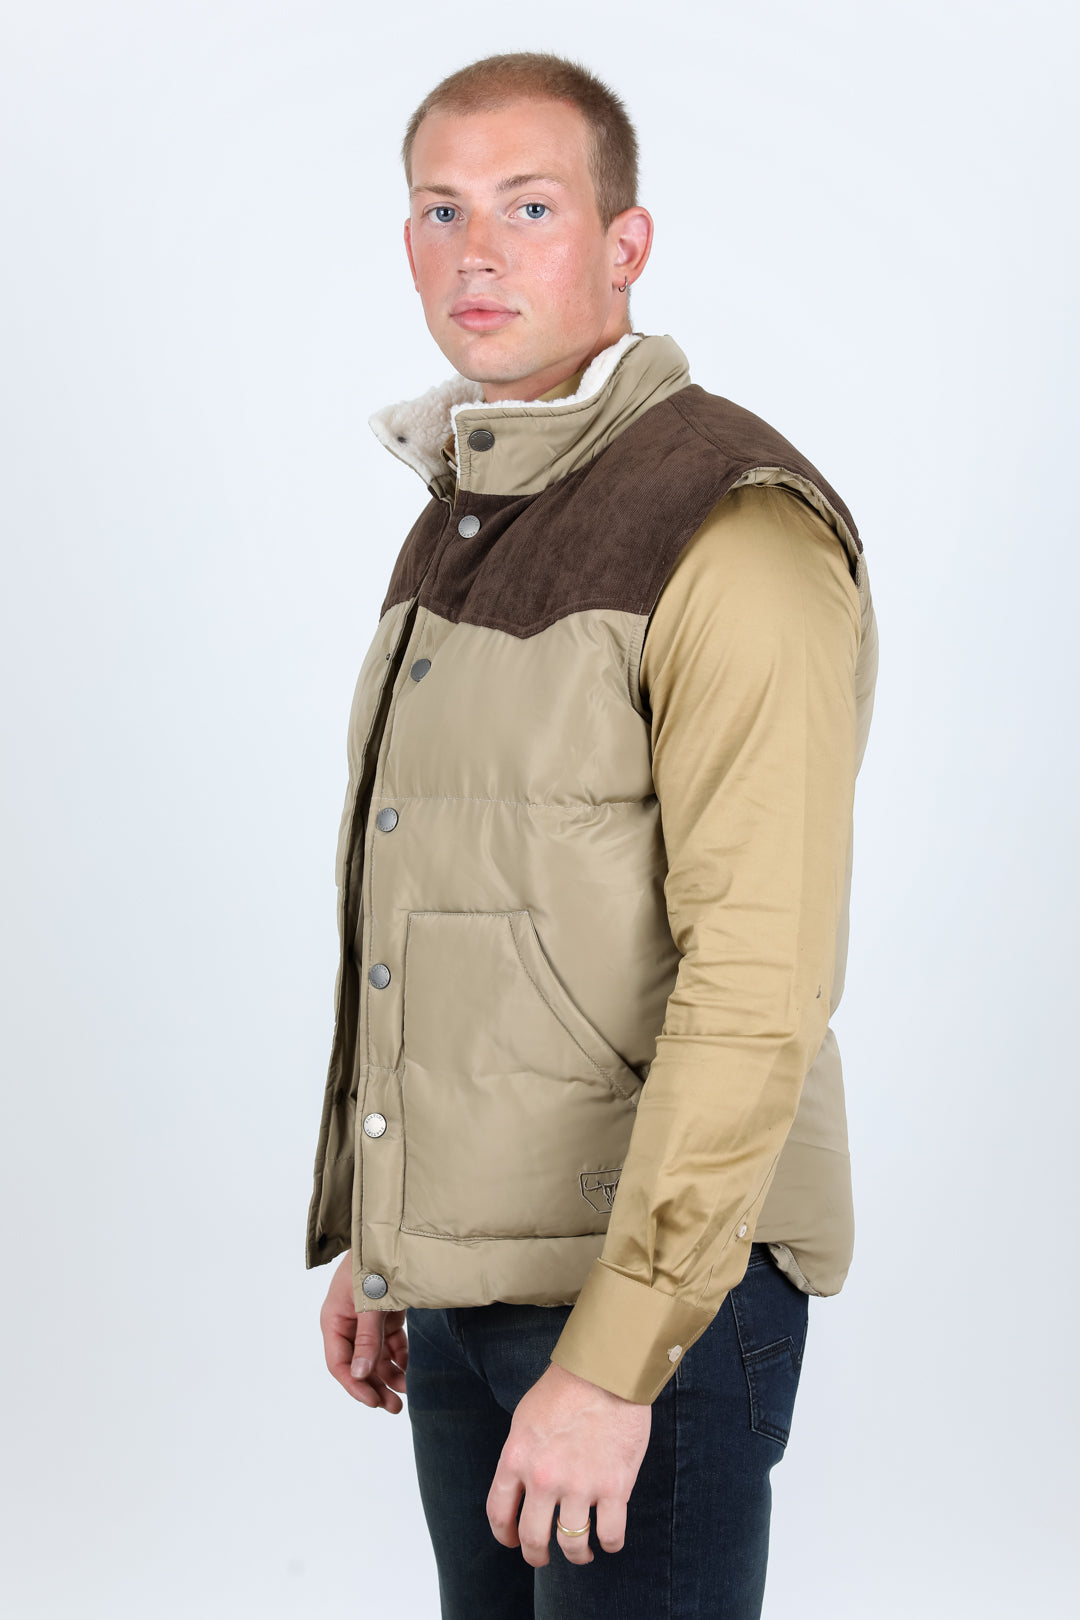 Men's Fur Lined Quilted Puffer Vest - Khaki